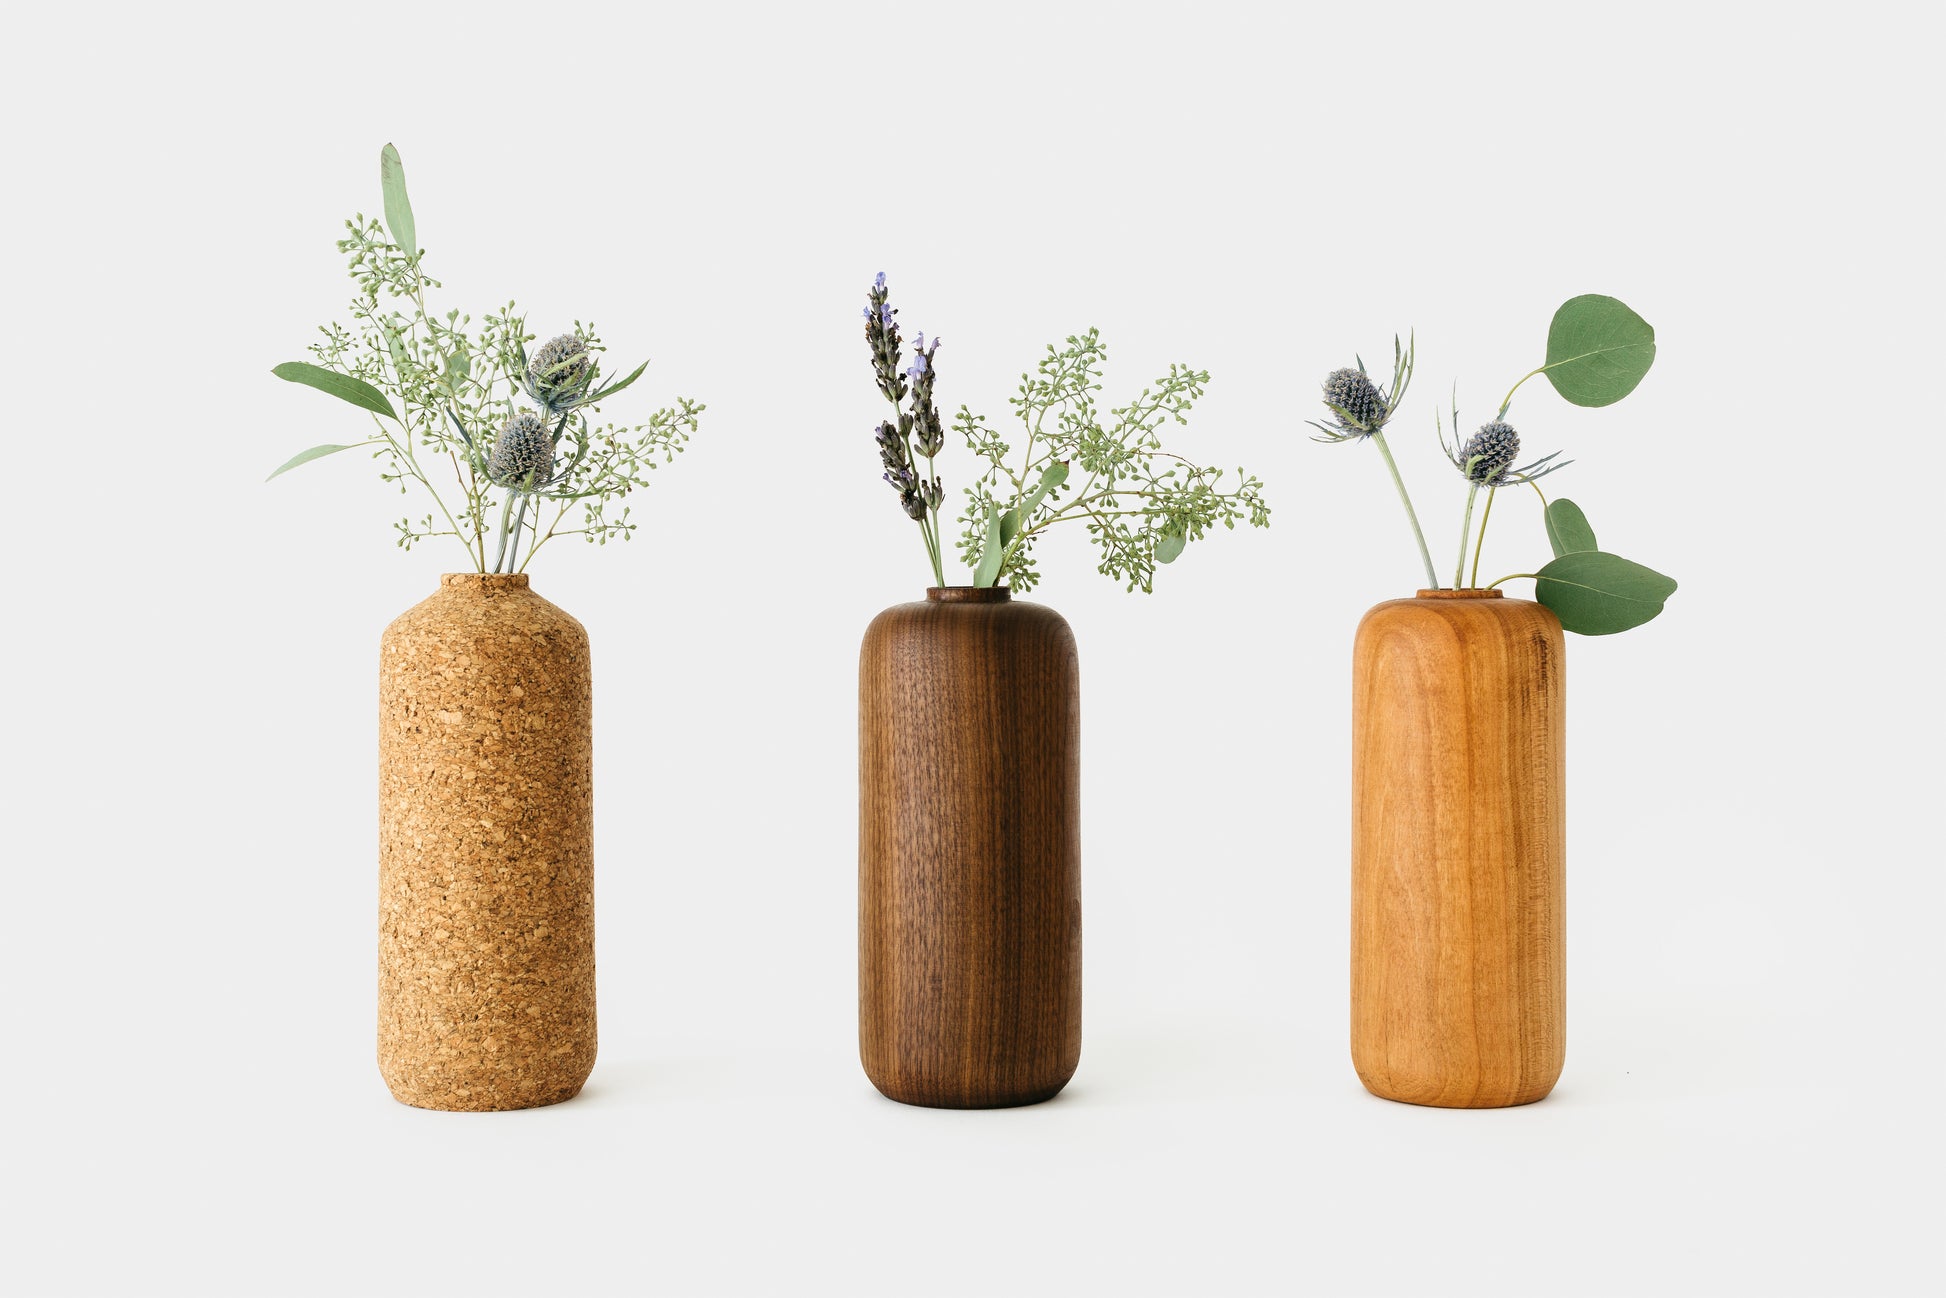 Collection of Tall Bud Vases holding flowers. Left to Right: Cork, Walnut, Cherry | Melanie Abrantes Designs